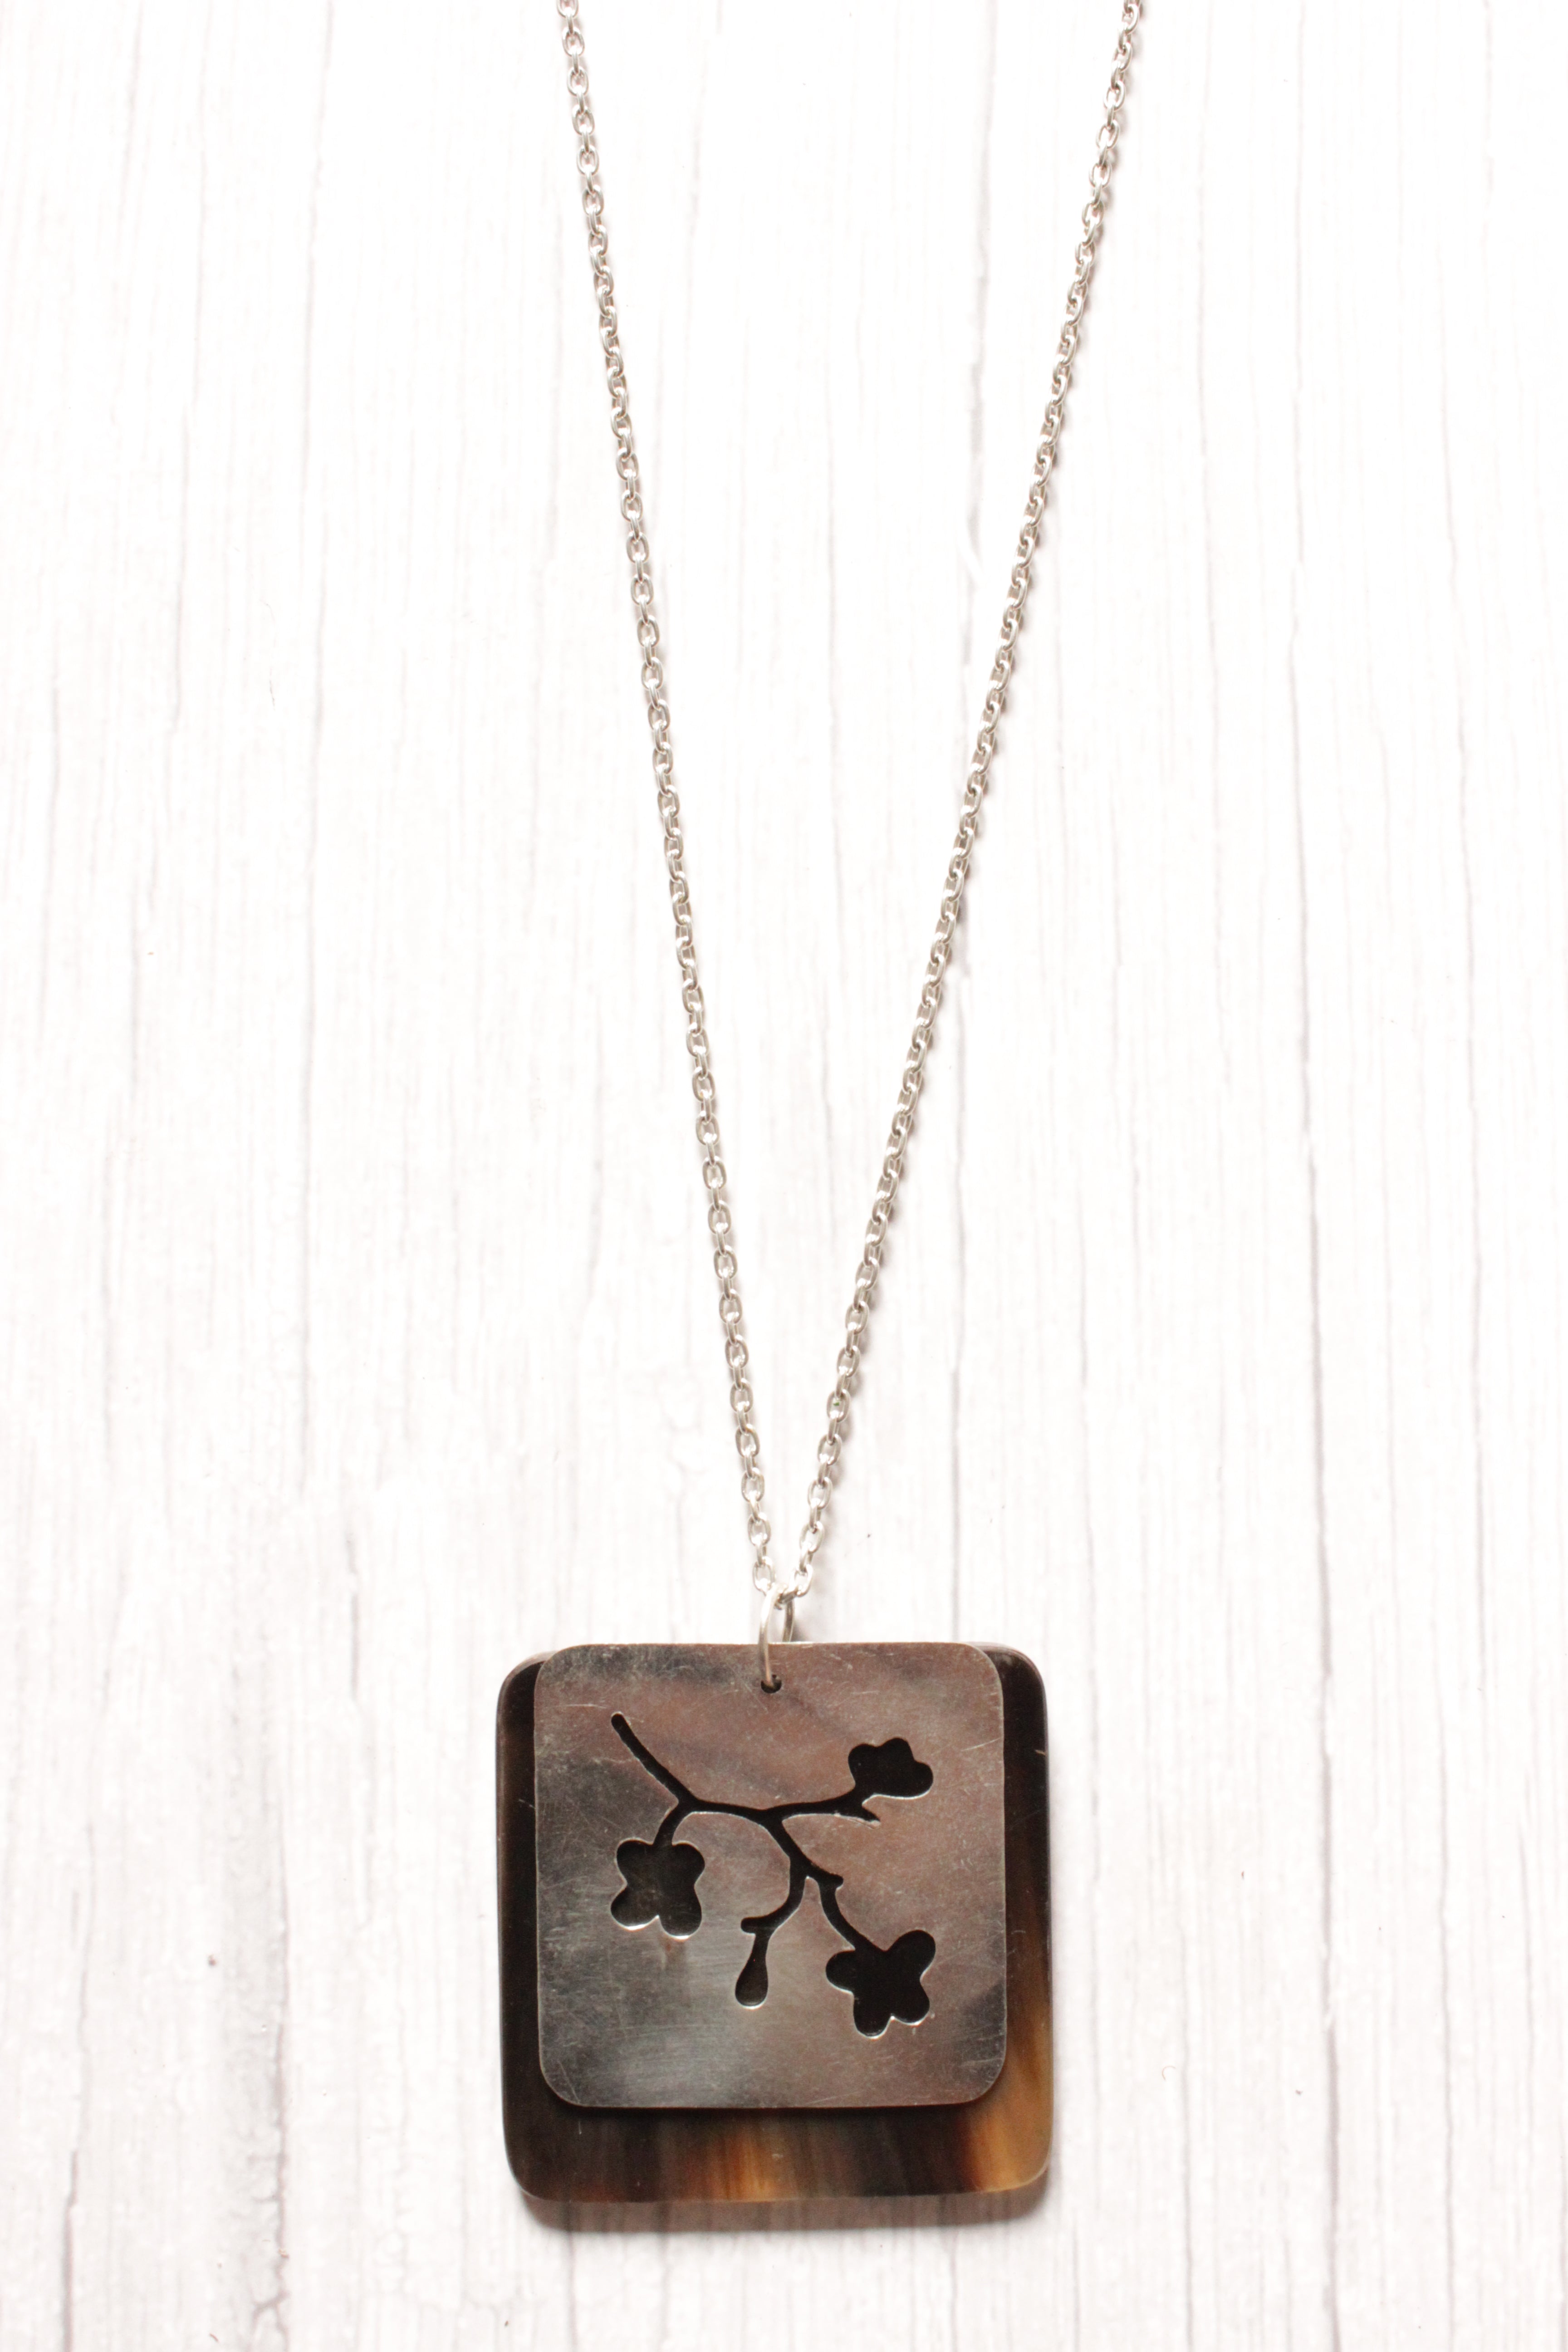 Flower Inscribed Pendant Long Chain Metal Necklace